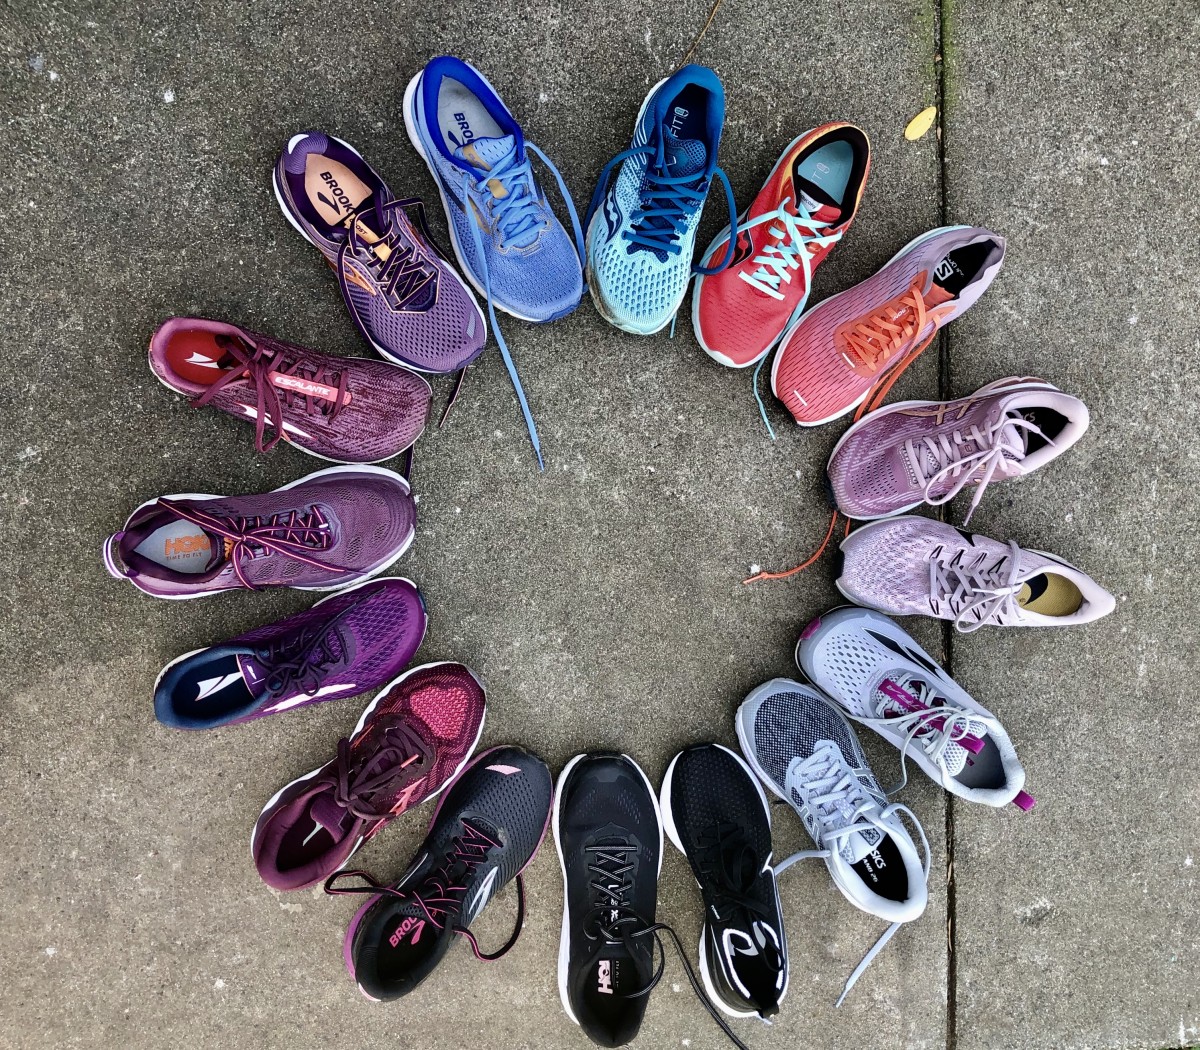 How to Choose Barefoot or Minimalist Shoes for Women - GearLab